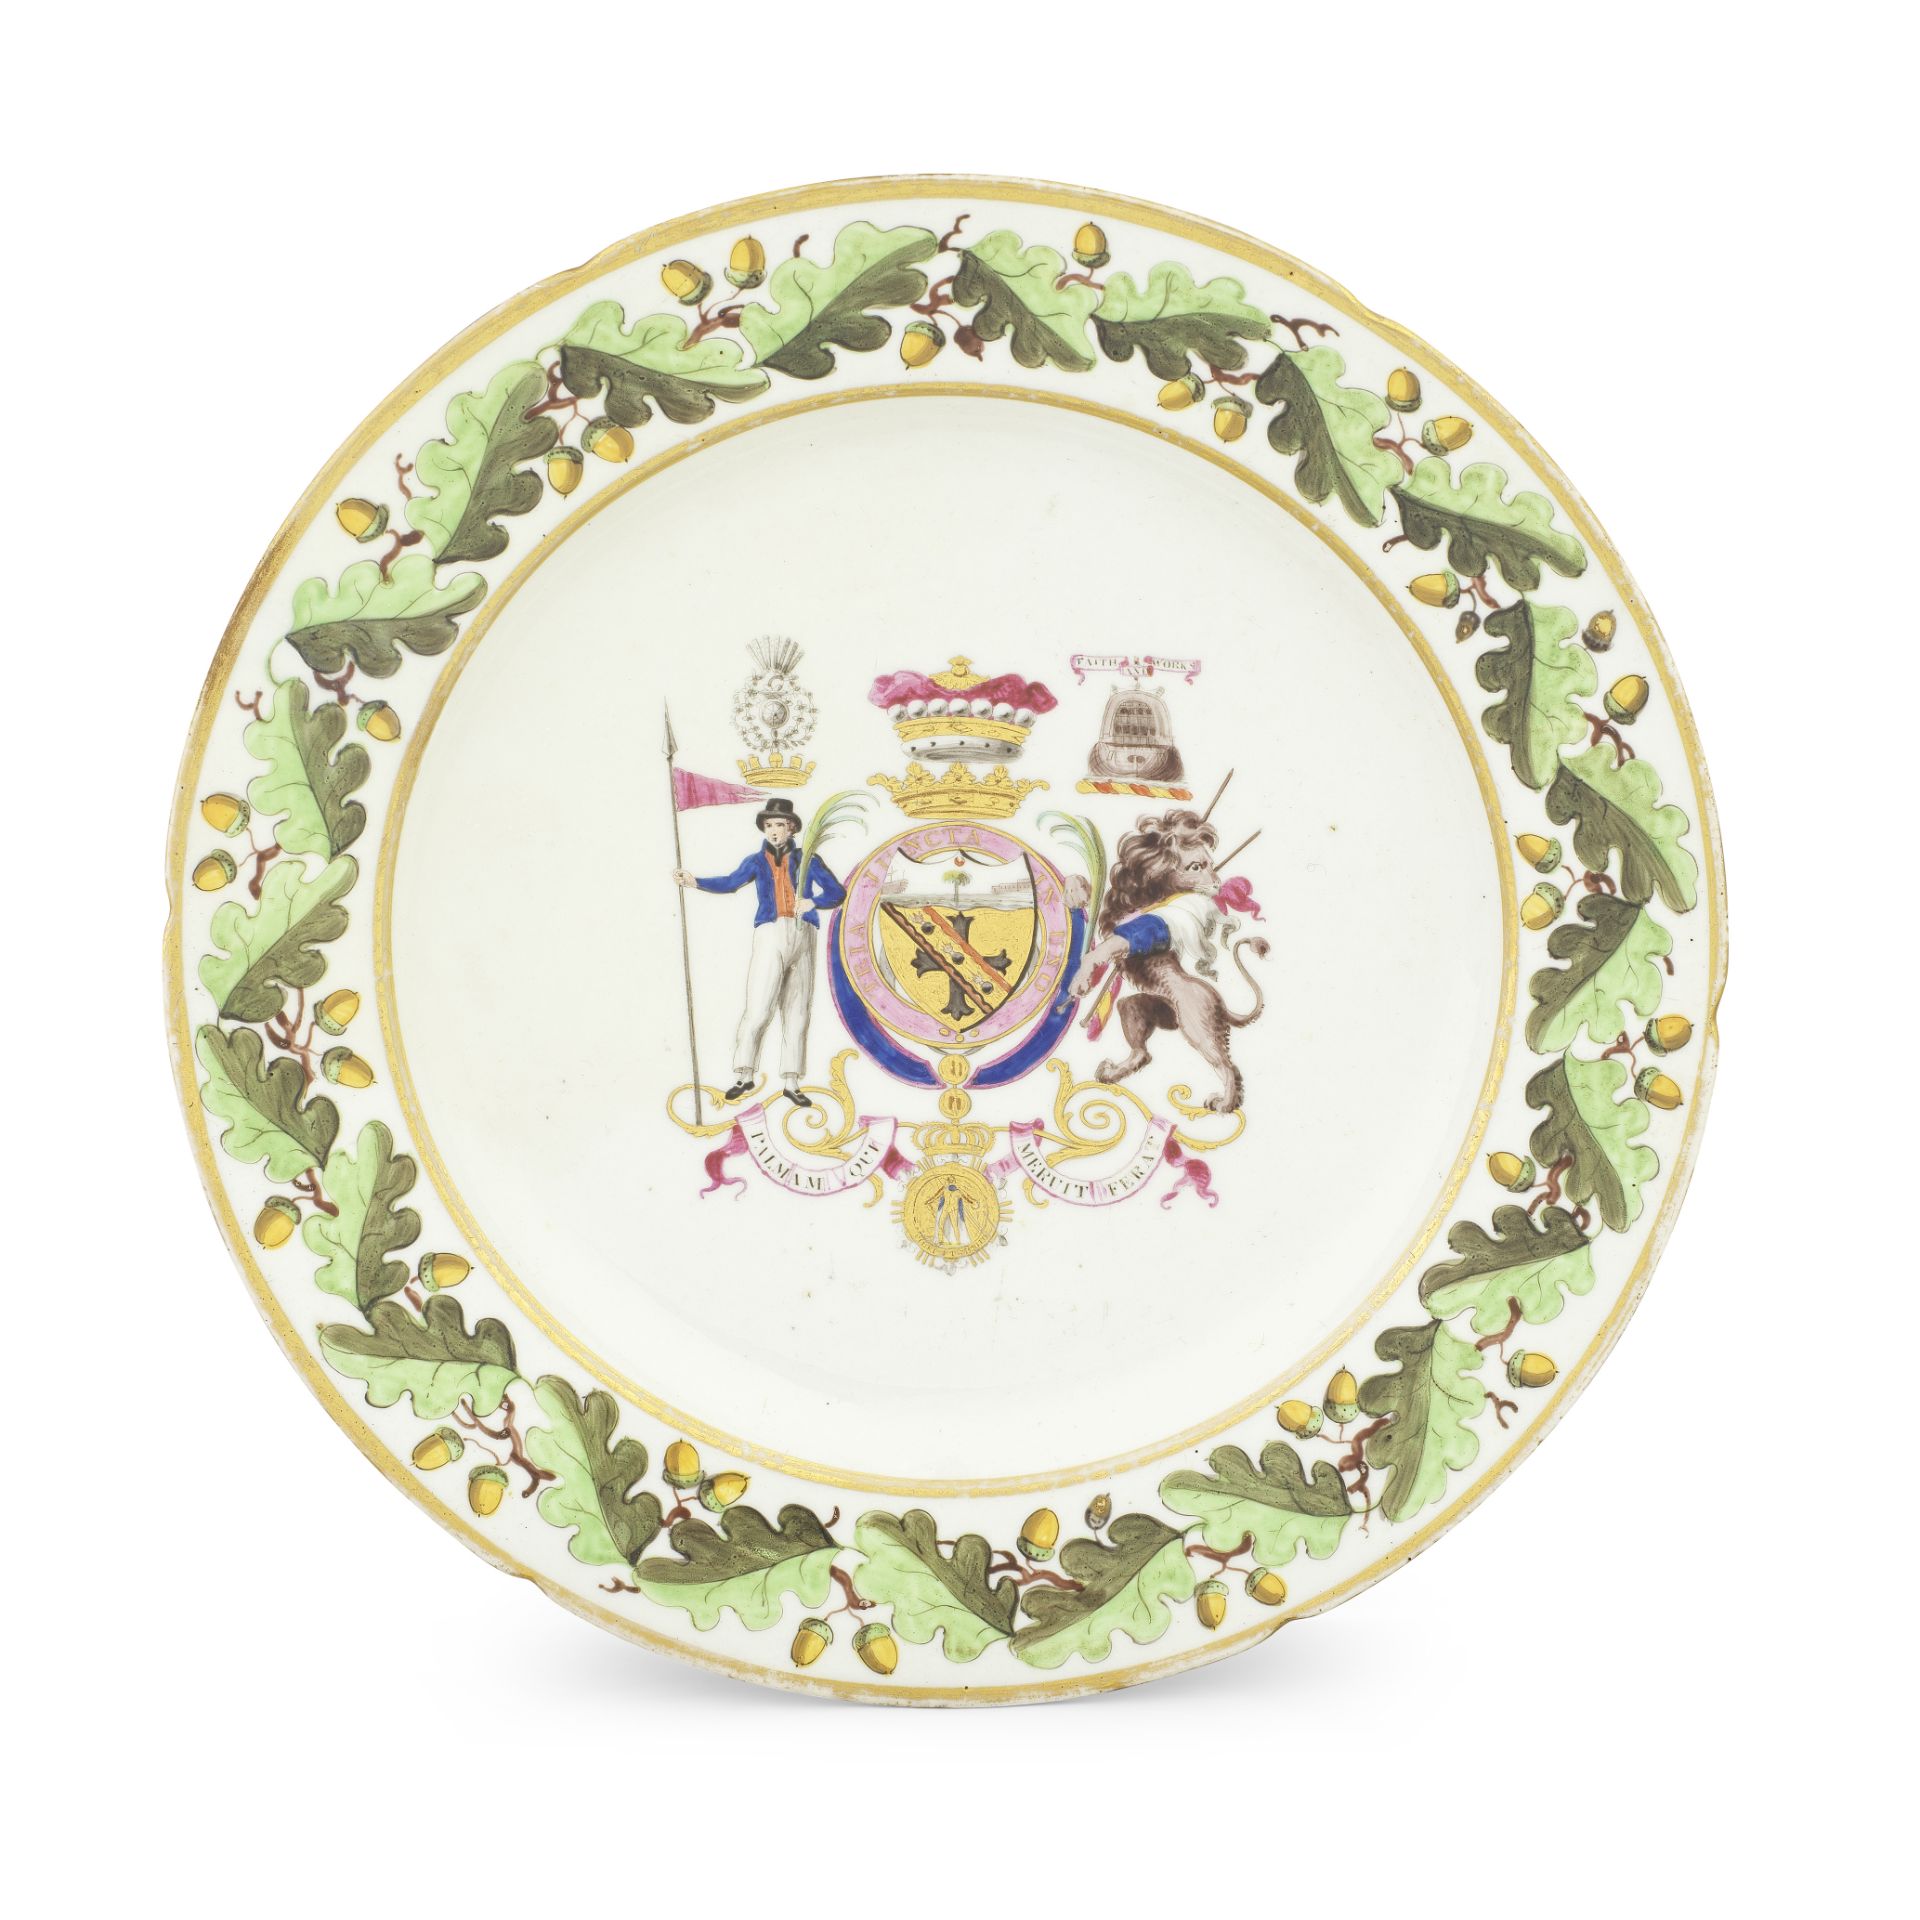 A Coalport plate, probably a Specimen or trial for the 'Nelson Set Tea Service', circa 1802